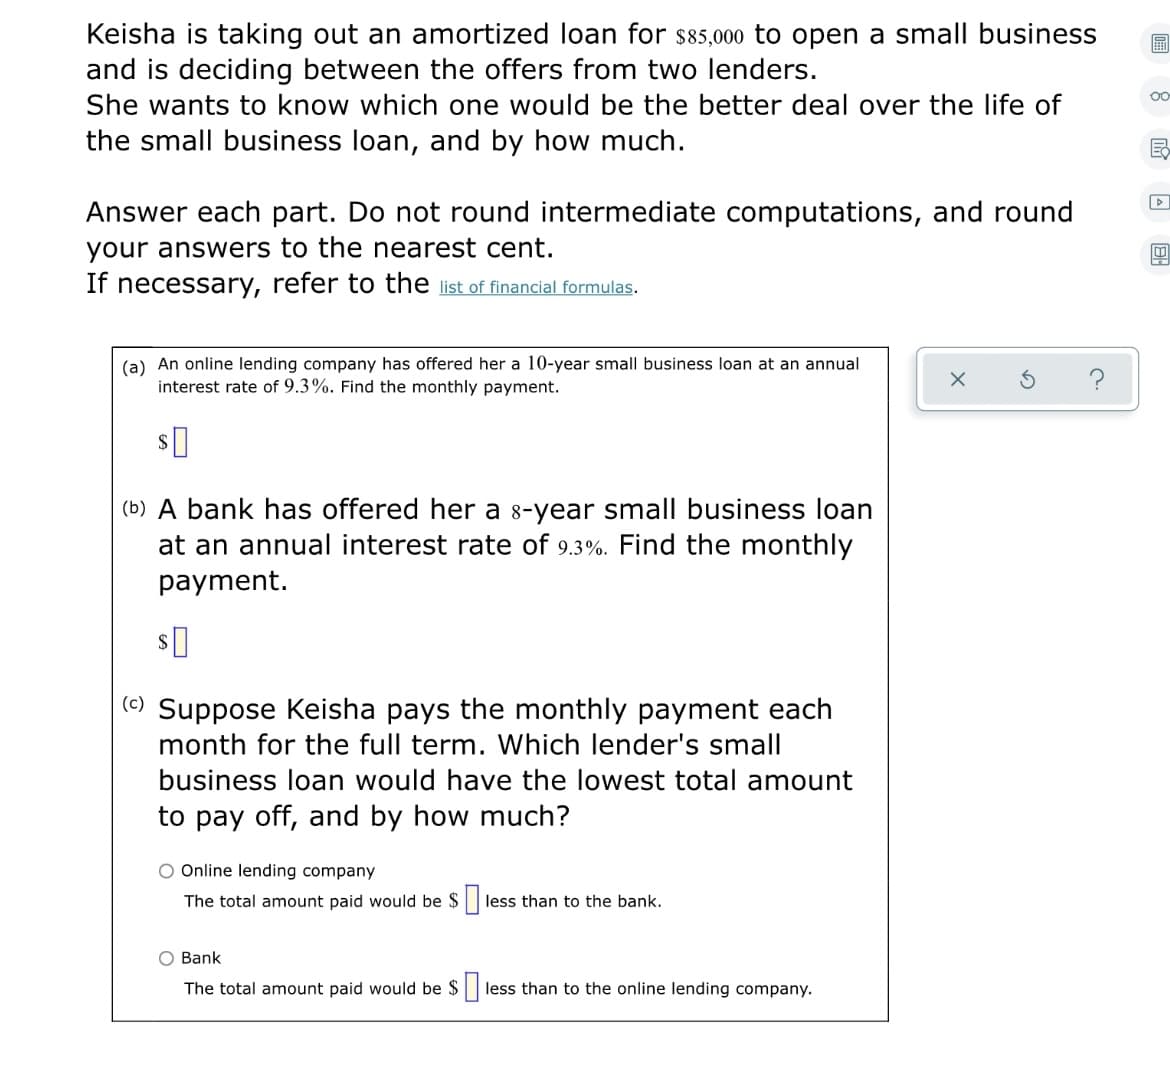 Keisha is taking out an amortized loan for s85,000 to open a small business
and is deciding between the offers from two lenders.
She wants to know which one would be the better deal over the life of
the small business loan, and by how much.
Answer each part. Do not round intermediate computations, and round
your answers to the nearest cent.
If necessary, refer to the list of financial formulas.
(a) An online lending company has offered her a 10-year small business loan at an annual
interest rate of 9.3%. Find the monthly payment.
(b) A bank has offered her a 8-year small business loan
at an annual interest rate of 9.3%. Find the monthly
payment.
(c) Suppose Keisha pays the monthly payment each
month for the full term. Which lender's small
business loan would have the lowest total amount
to pay off, and by how much?
O Online lending company
The total amount paid would be $
less than to the bank.
O Bank
The total amount paid would be $|
less than to the online lending company.
